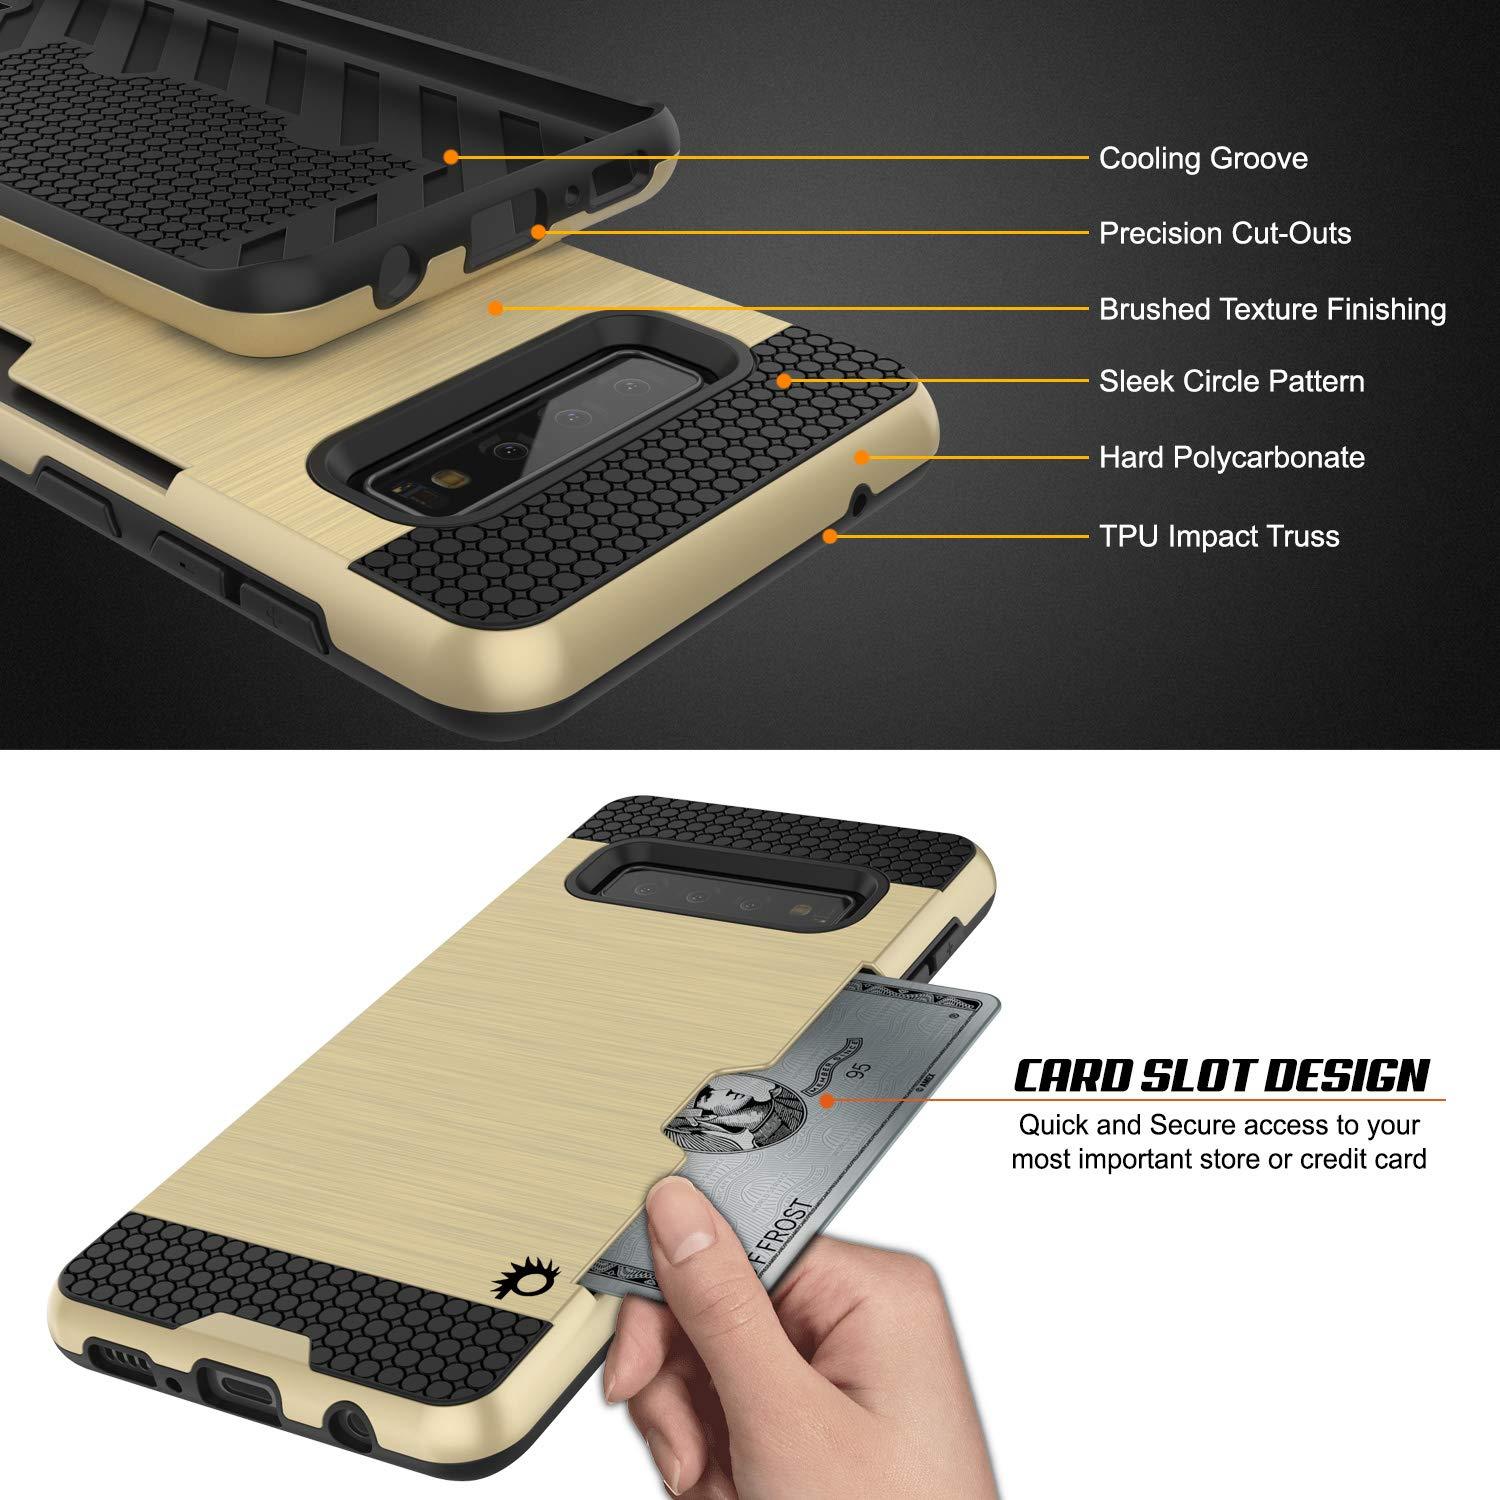 Galaxy S10 Case, PUNKcase [SLOT Series] [Slim Fit] Dual-Layer Armor Cover w/Integrated Anti-Shock System, Credit Card Slot [Gold]